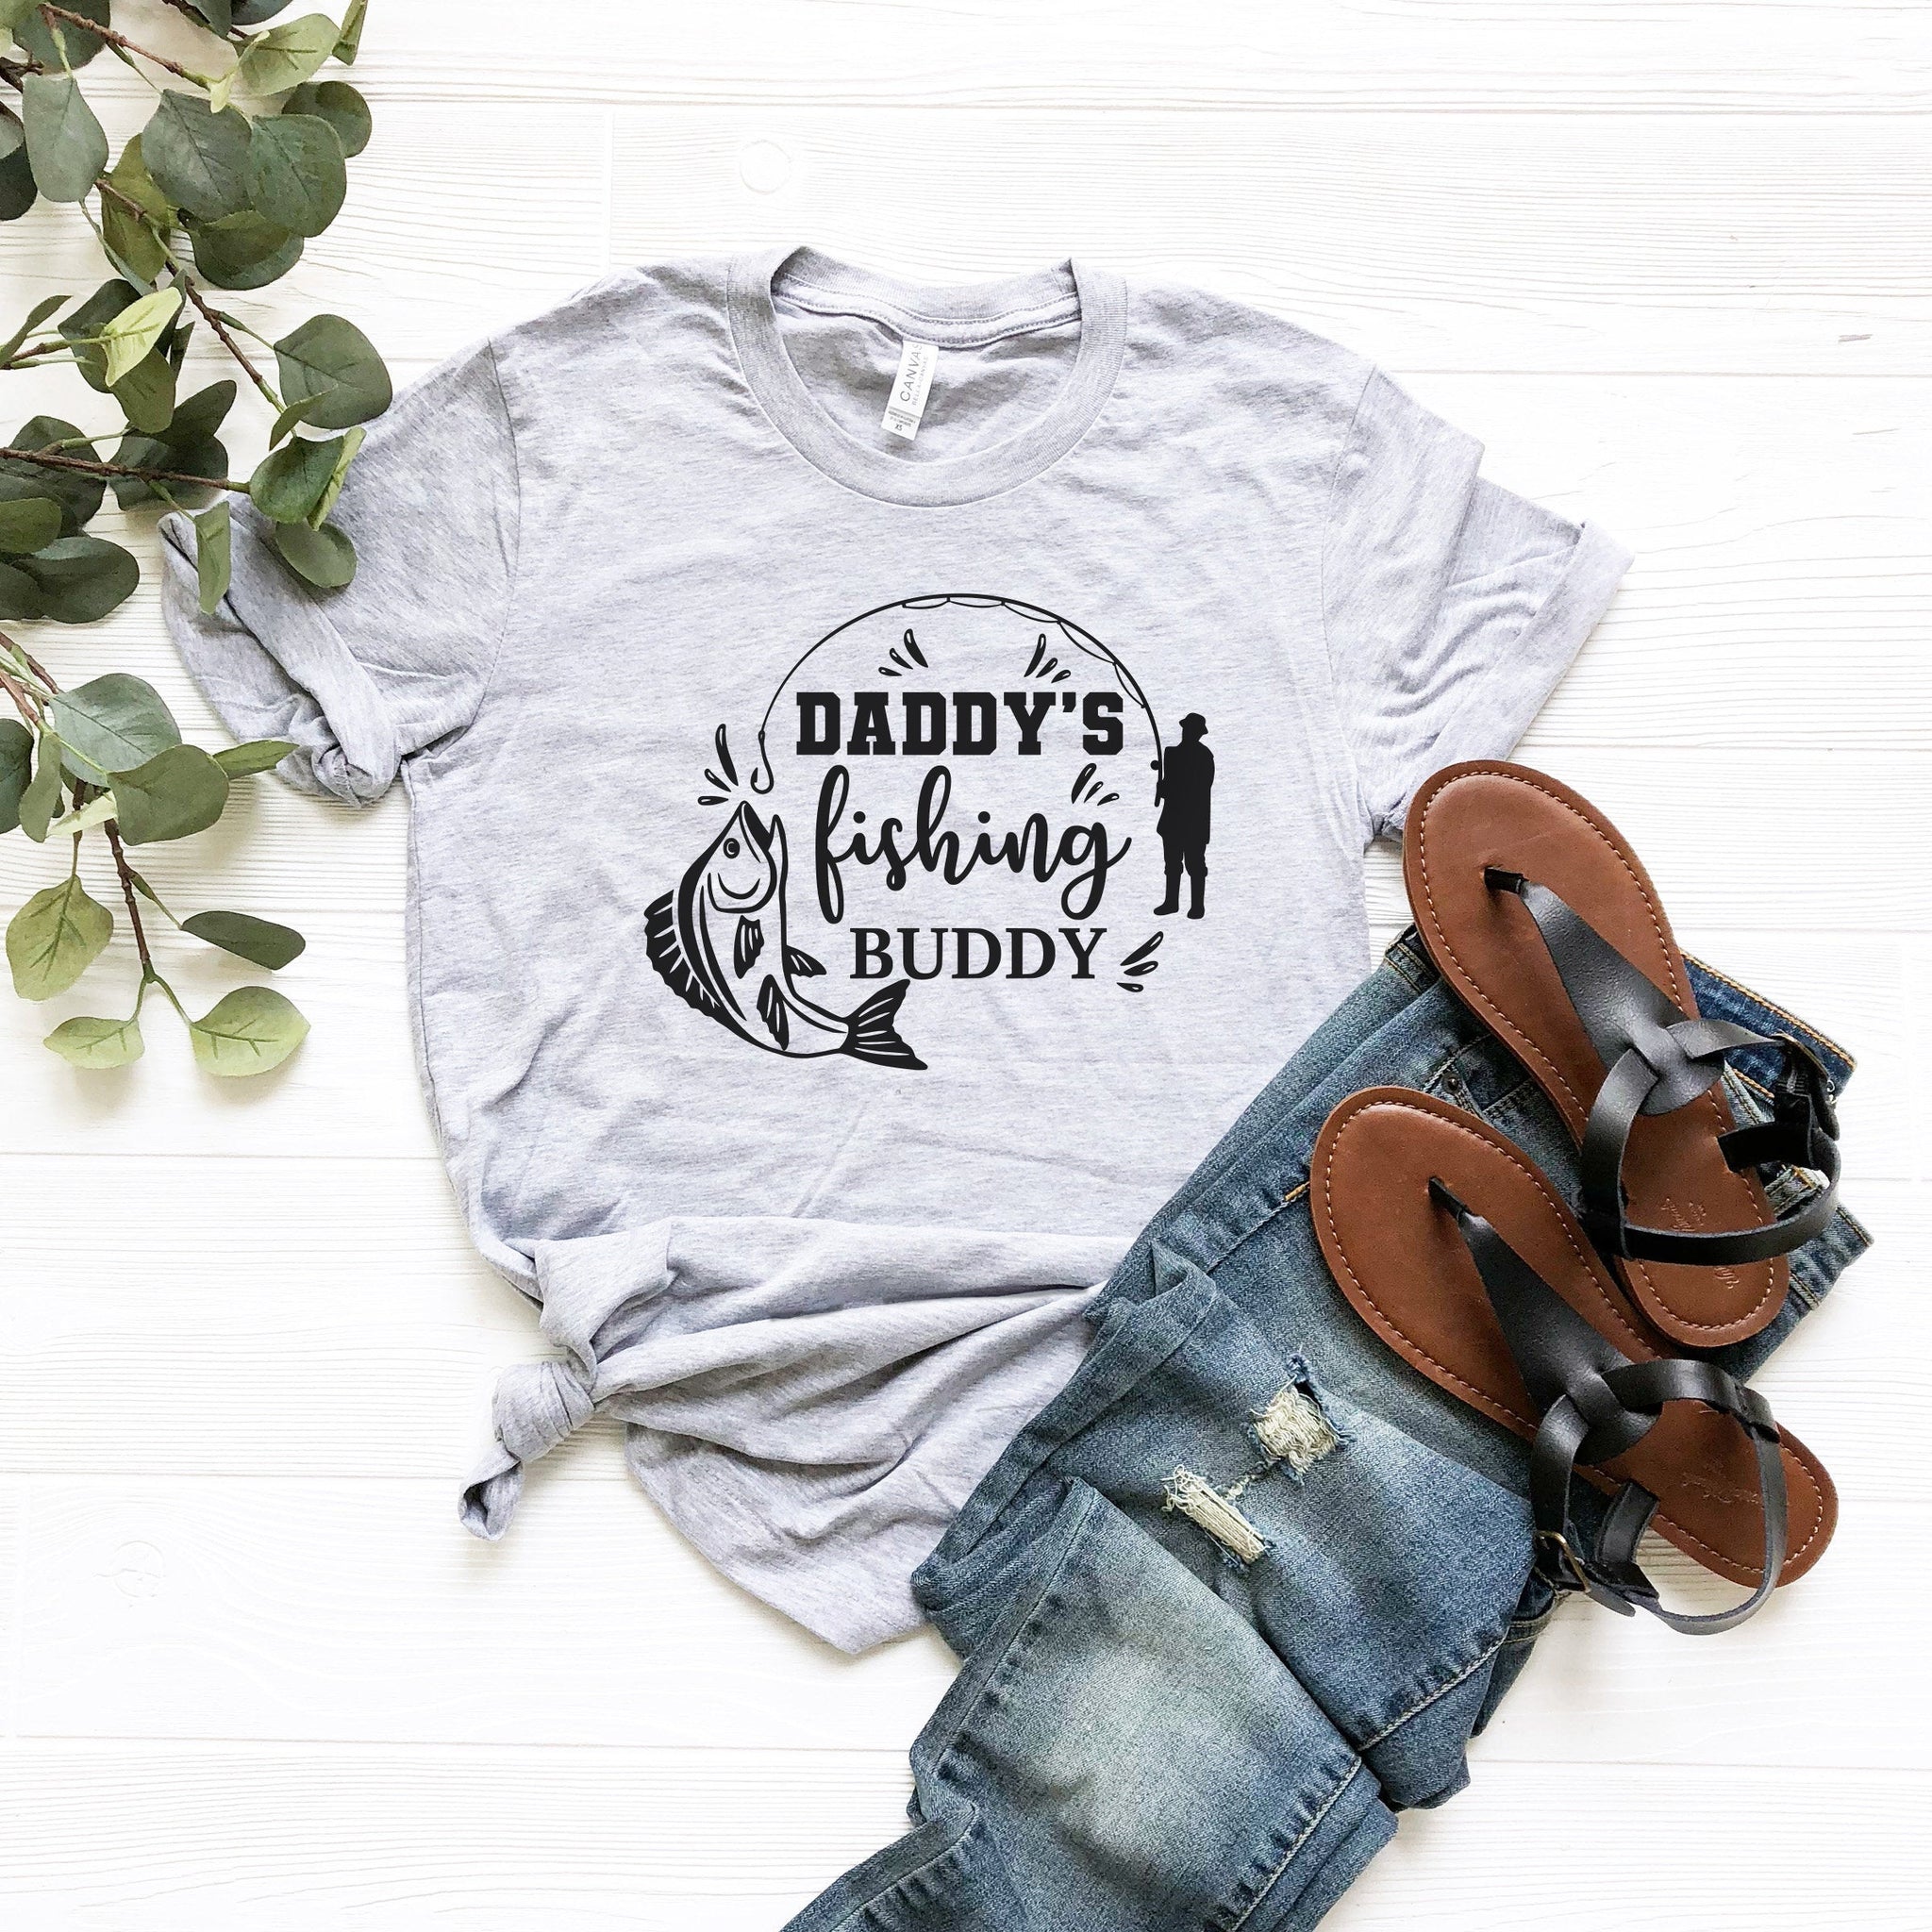 New Dad Shirt, New Dad Gift, Gift for New Dad, Shirt for New Dad, My First Father's Day Shirt, Funny New Dad Tee, New Dad Fathers Day Shirt